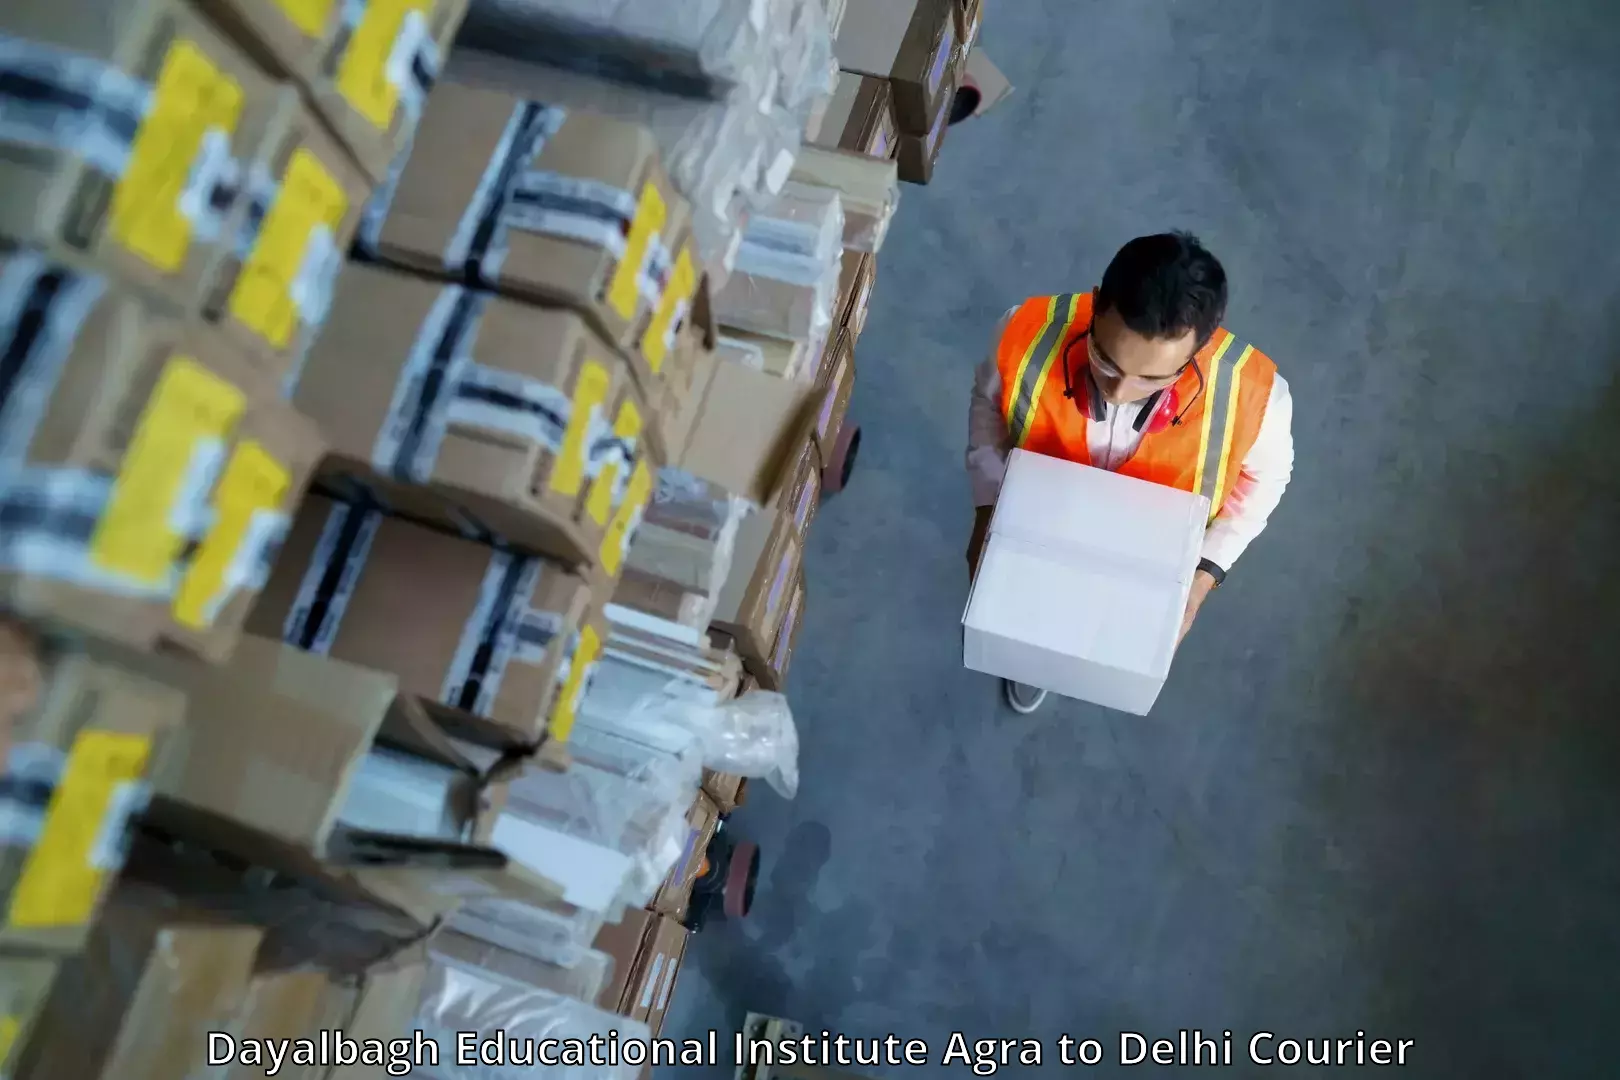 Logistics management in Dayalbagh Educational Institute Agra to Lodhi Road